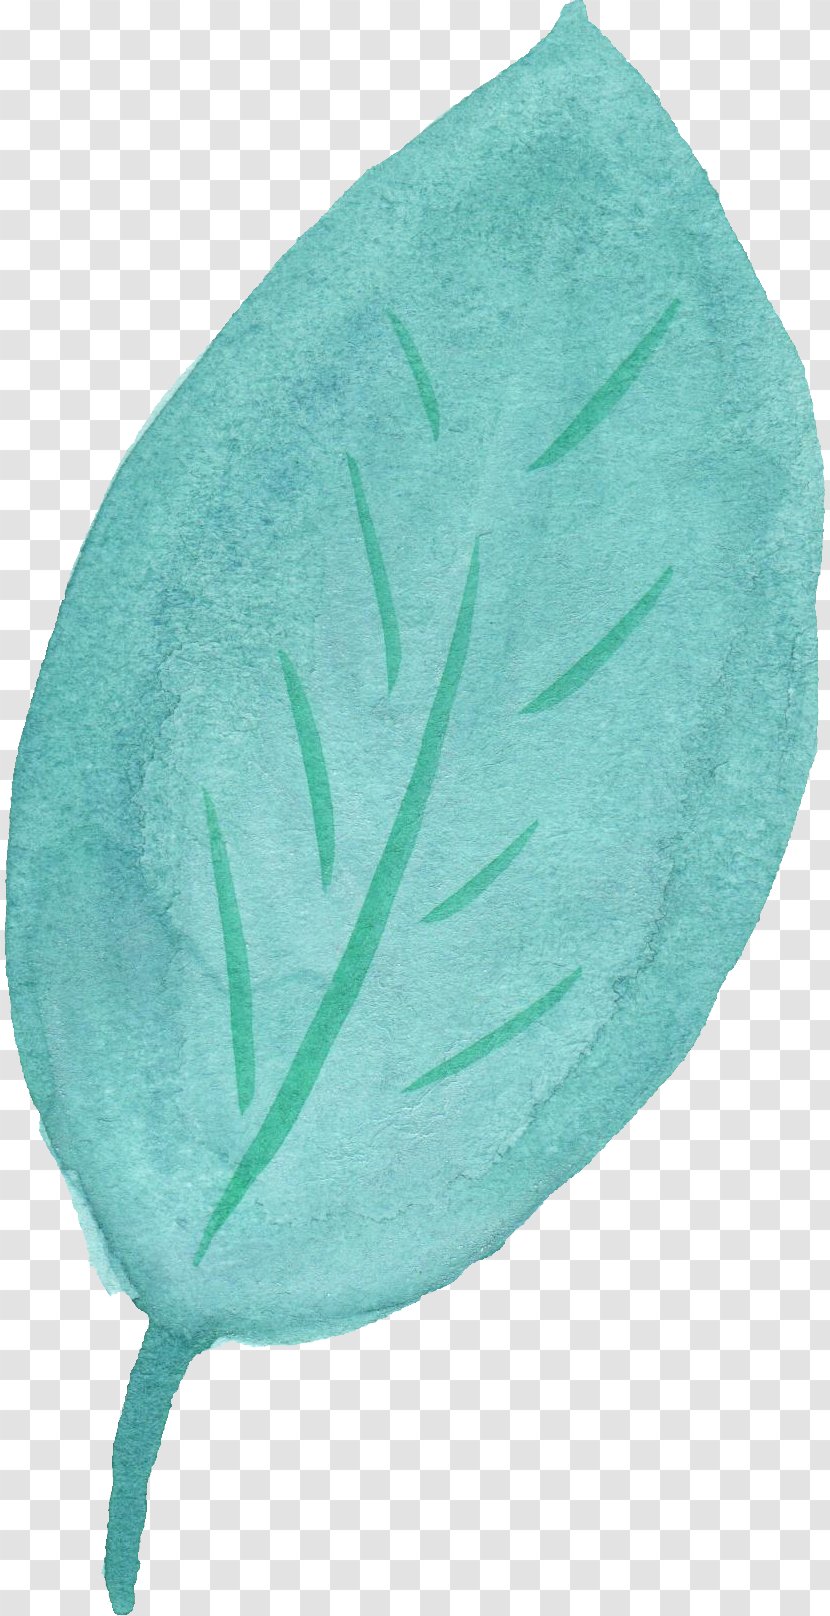 Leaf Watercolor Painting - Leaves Transparent PNG